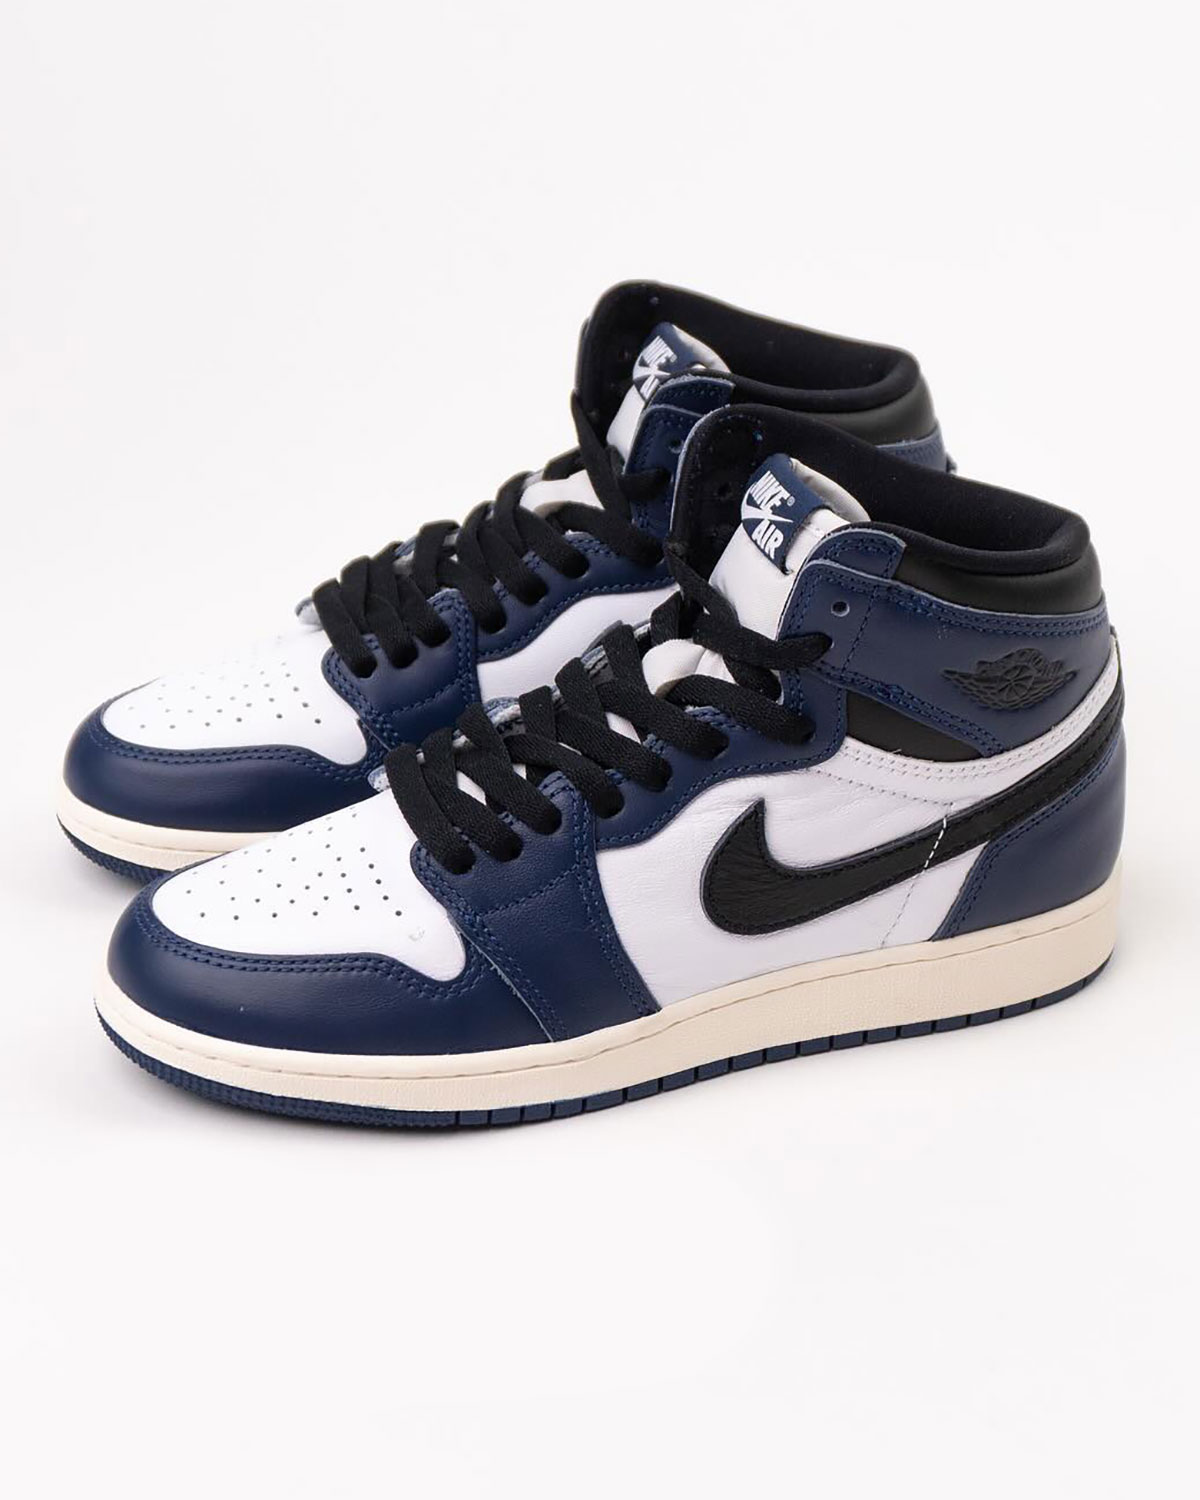 Do you really know the history of the Air Jordan Selection 1 Retro High Og Midnight Navy Dz5485 401 3